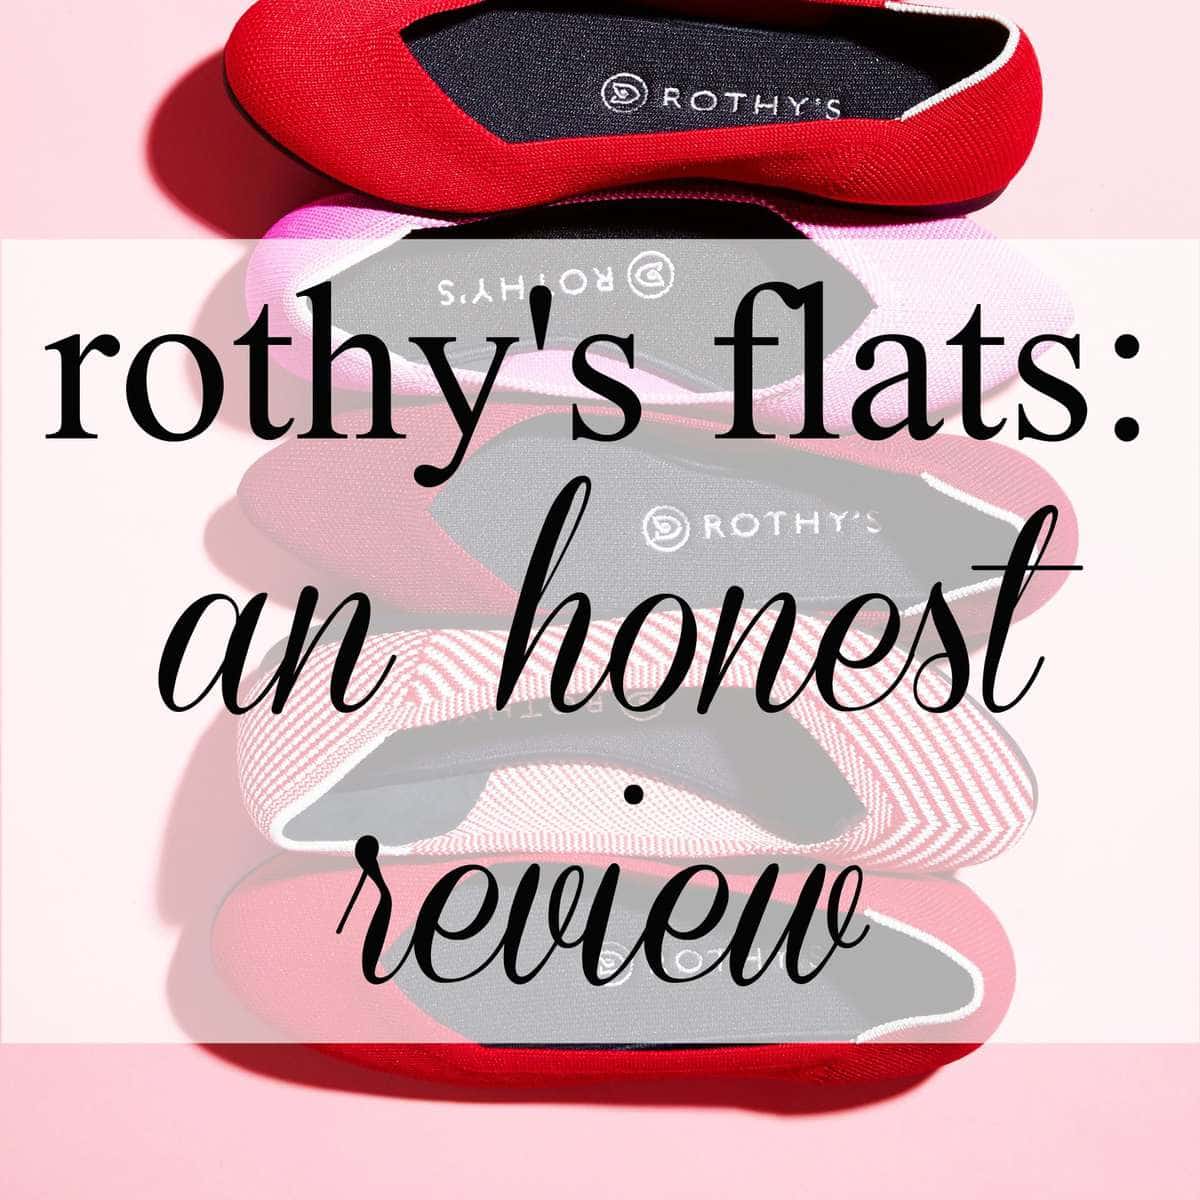 rothys honest review